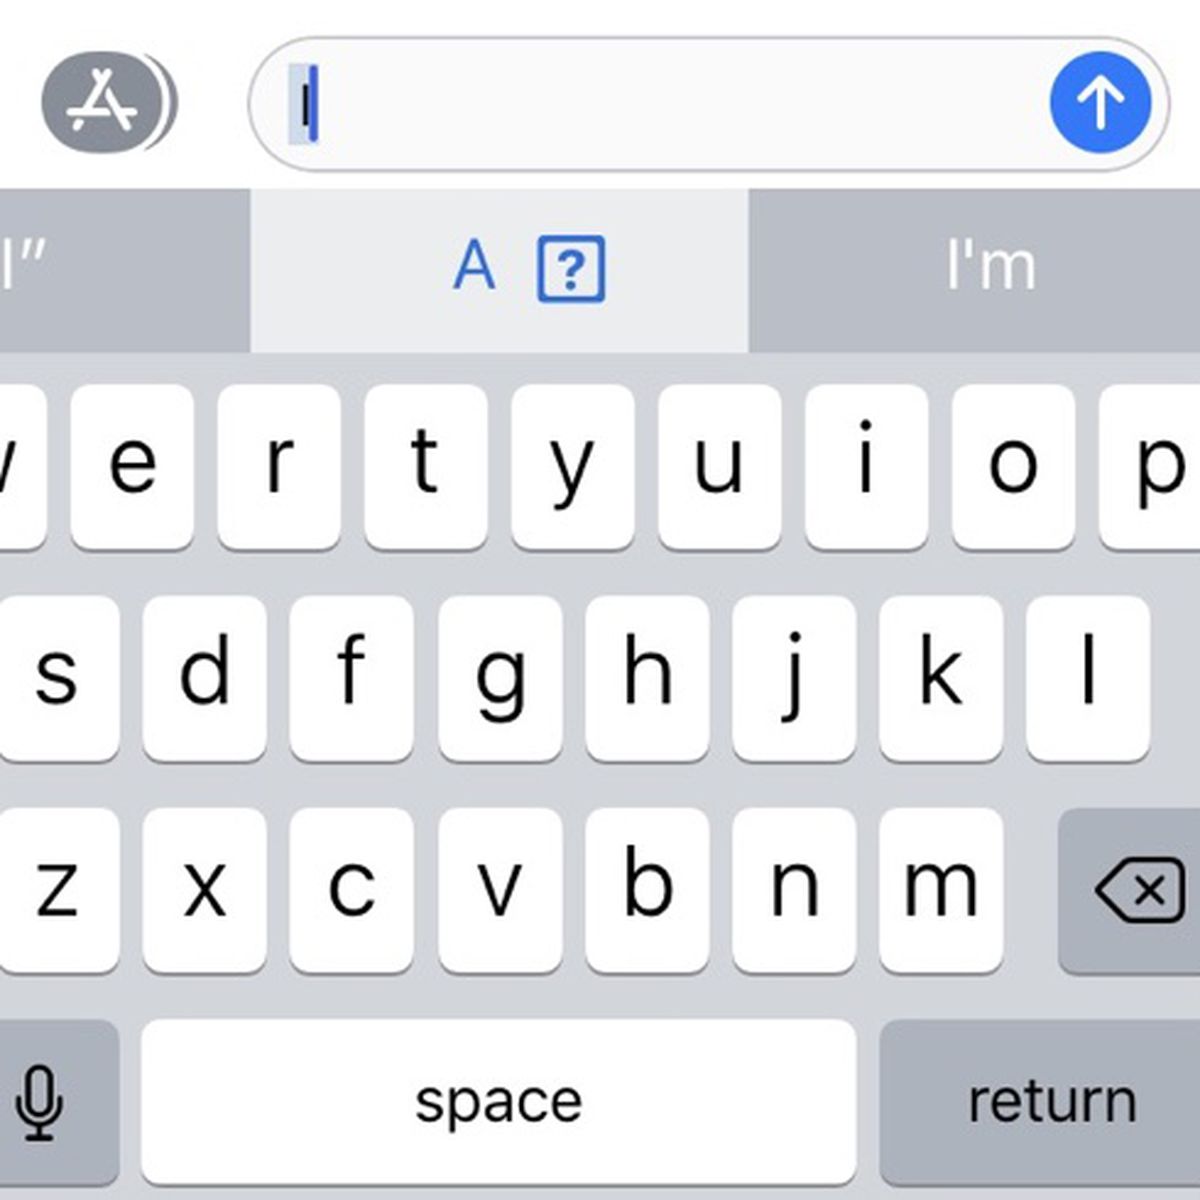 Ios 11 Predictive Text Bug Automatically Changes I To A For Some Users Updated Macrumors - roblox ios 2011 letter glitch